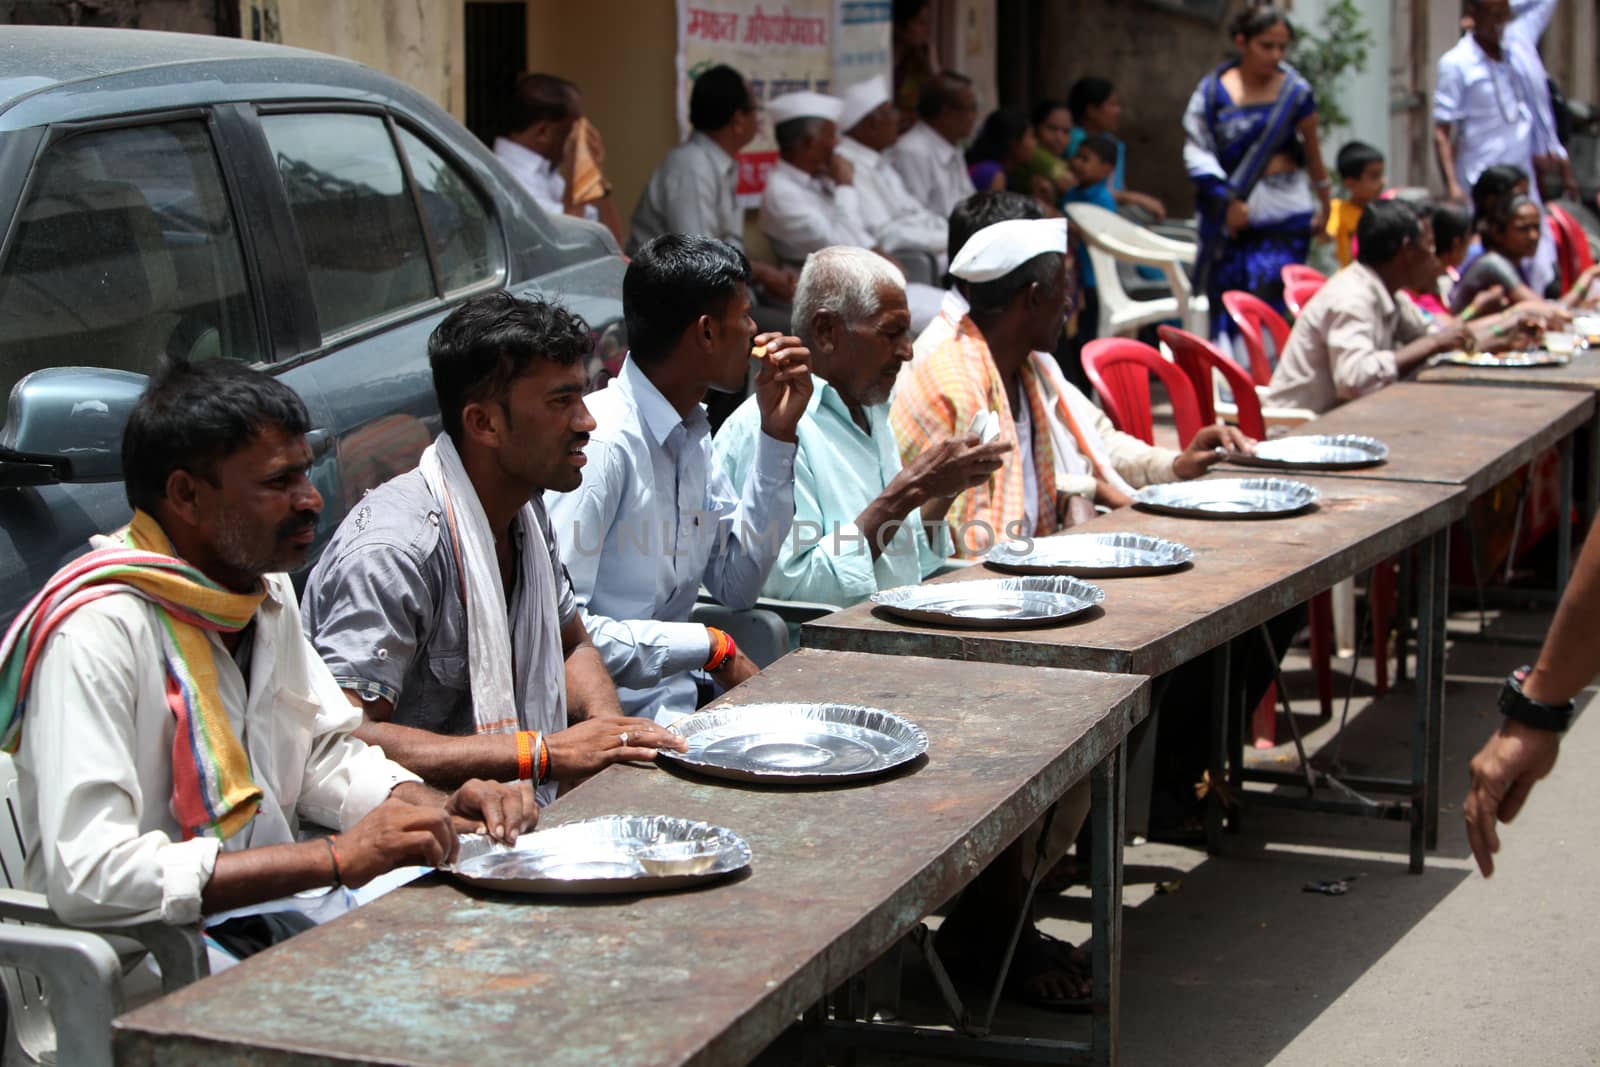 Pune, India - July 11, 2015: Indian pilgrims sitting on table on by thefinalmiracle